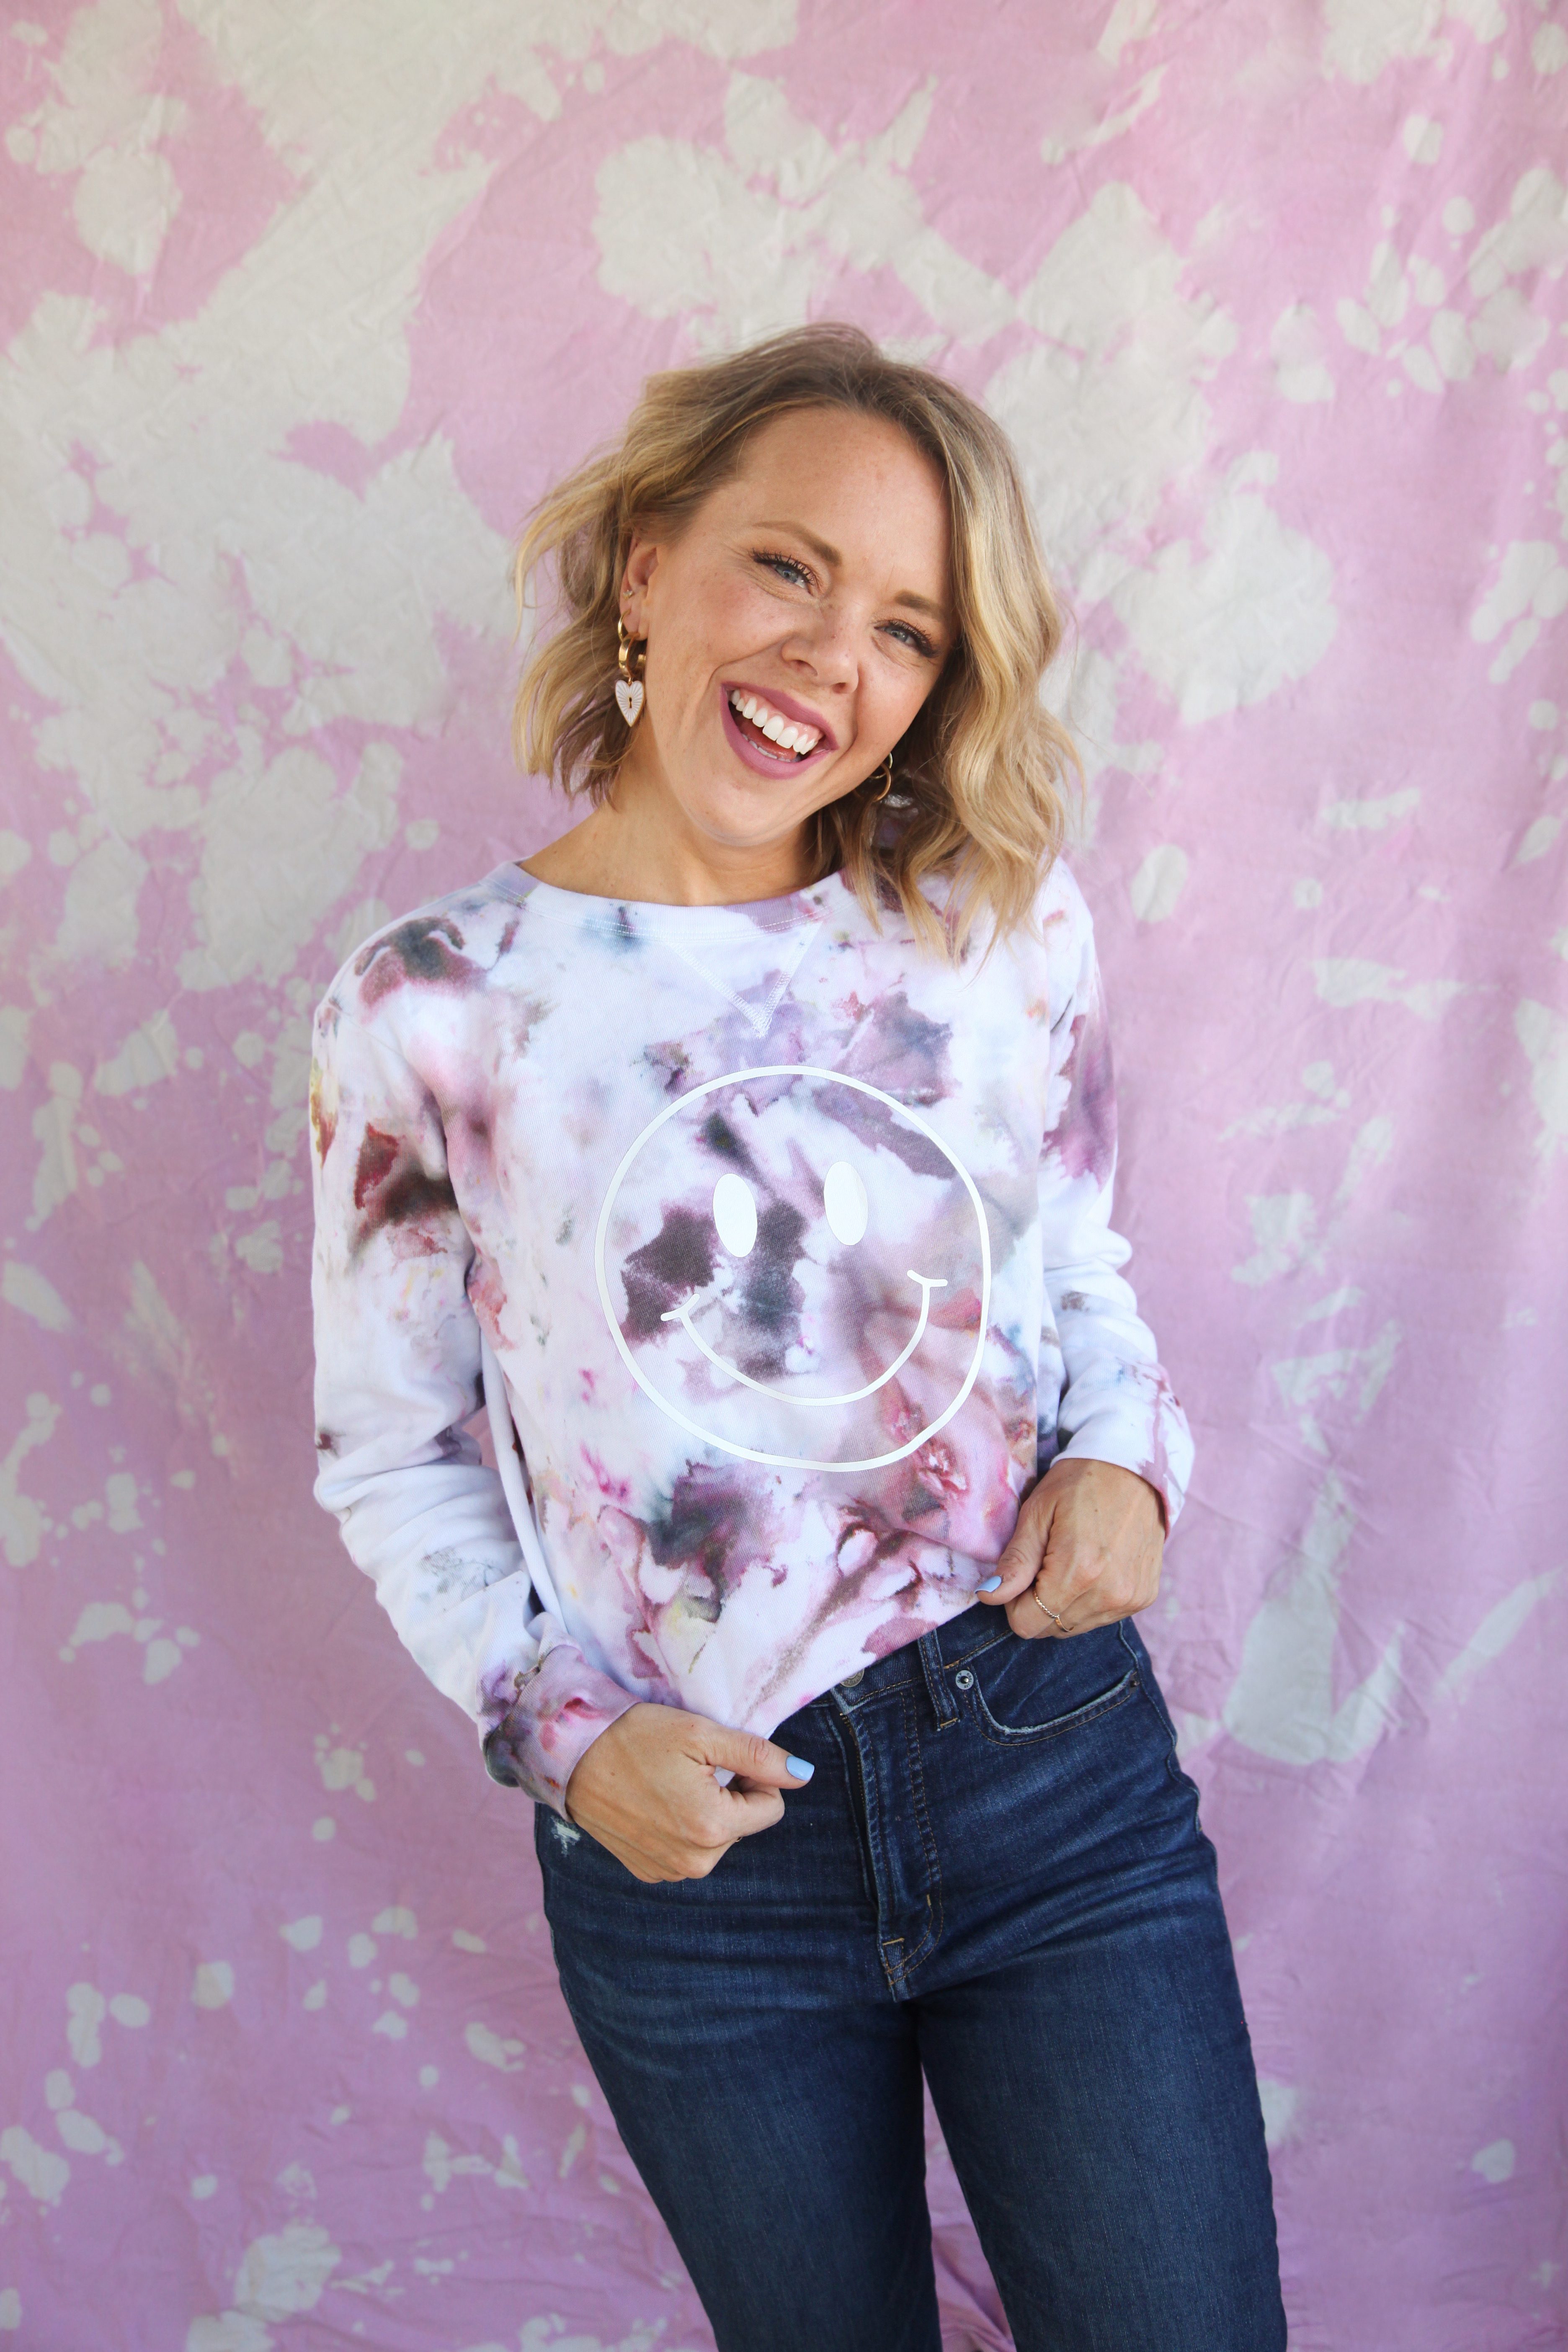 90s Inspired Ice Dye Sweatshirt Tutorial + a tutorial featured by Top US Craft Blog + The Pretty Life Girls